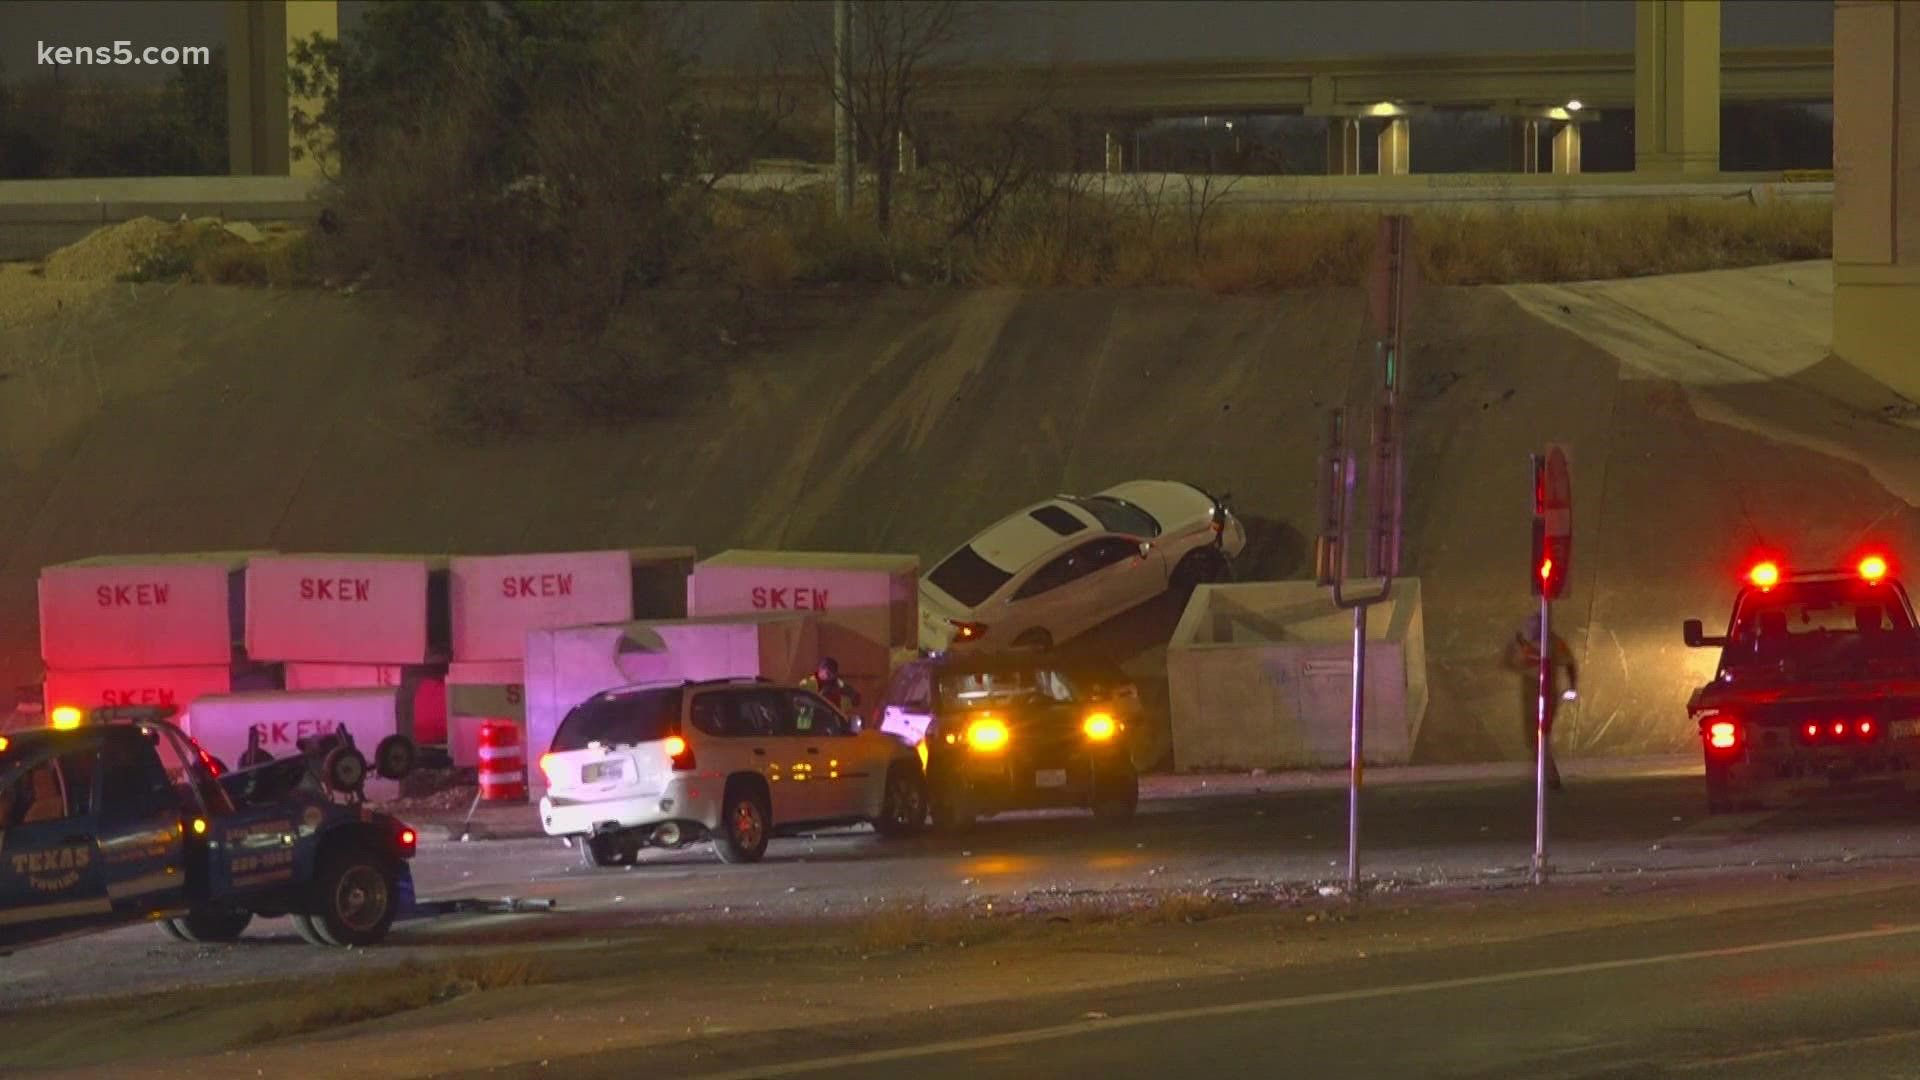 There were no injuries reported, but the officer asked drivers to slow down at the curve due to the amount of fatal accidents at that intersection.